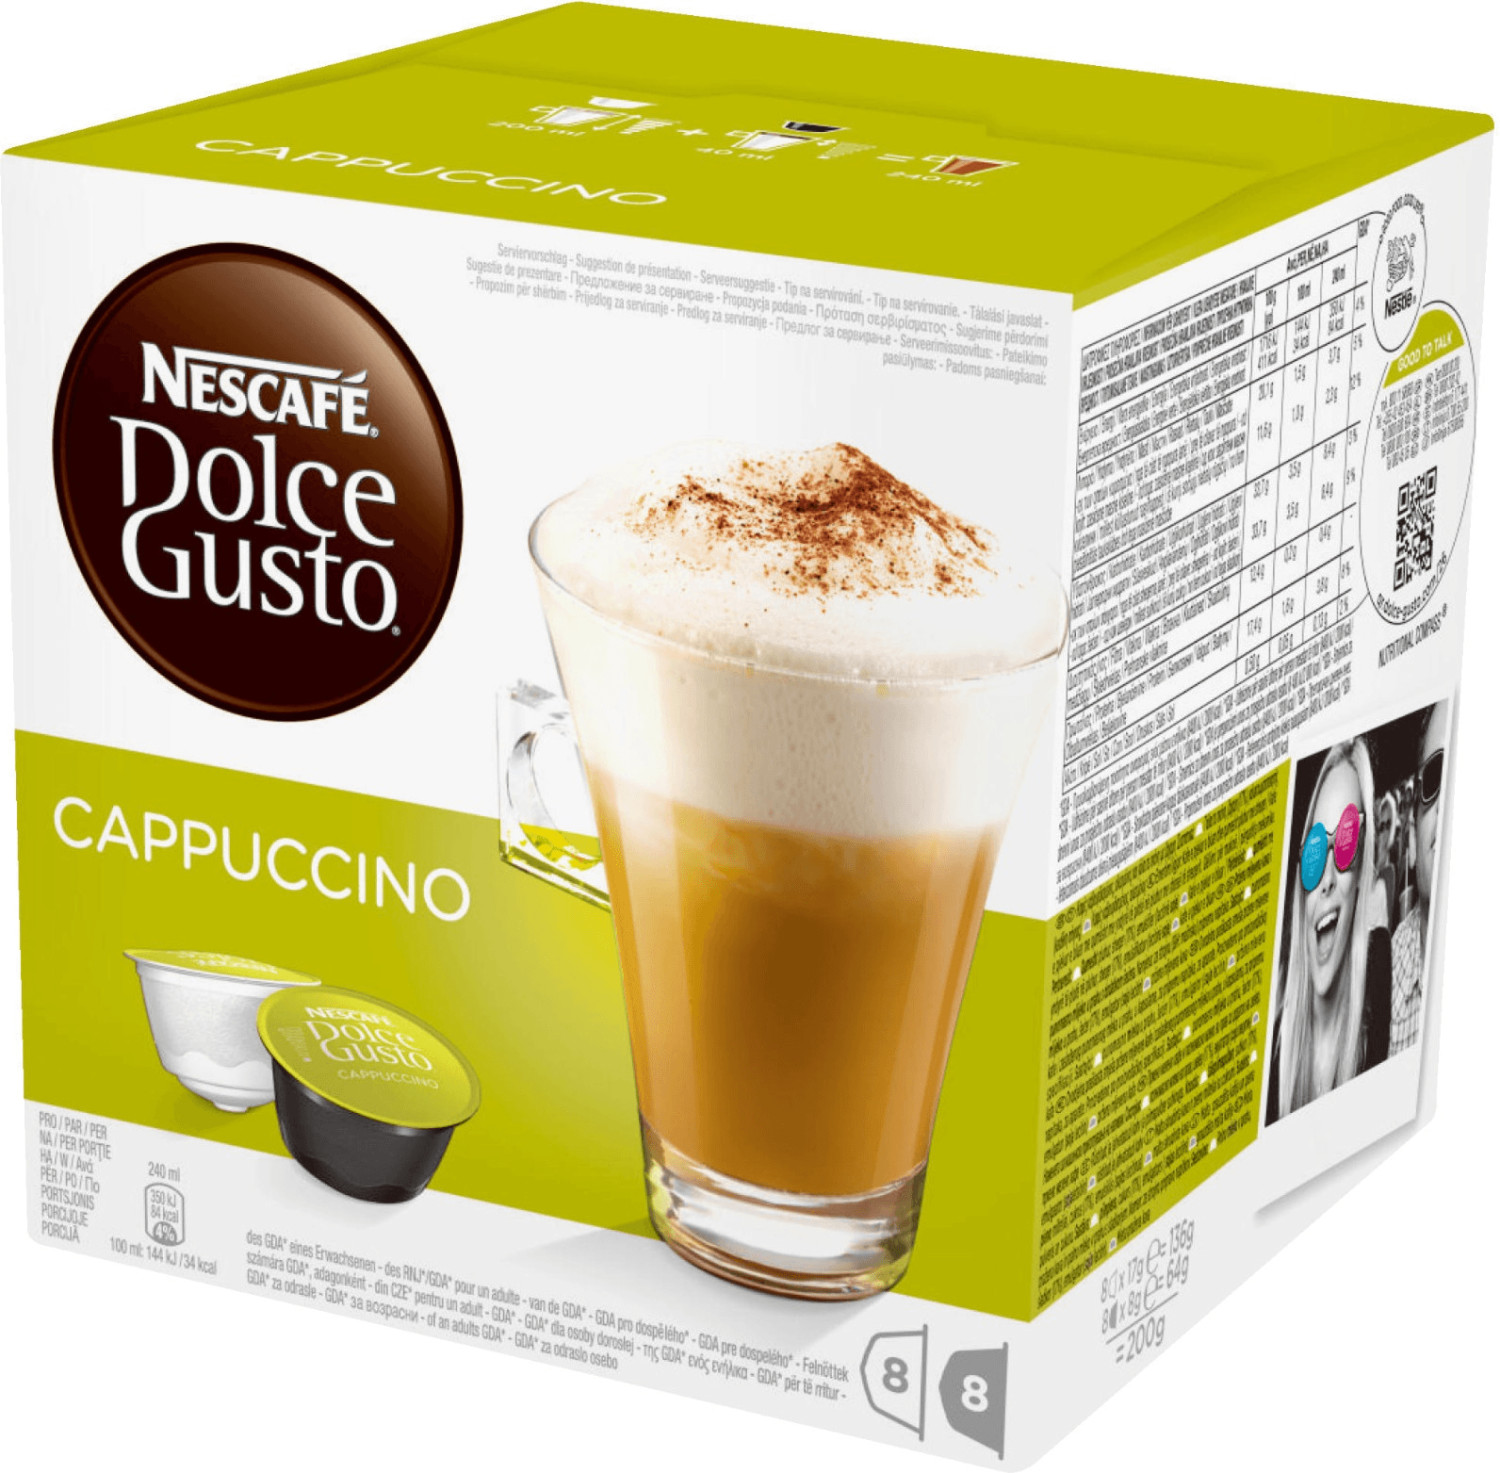 Buy Nescafé Dolce Gusto Cappuccino (x16) from £8.23 (Today) – Best